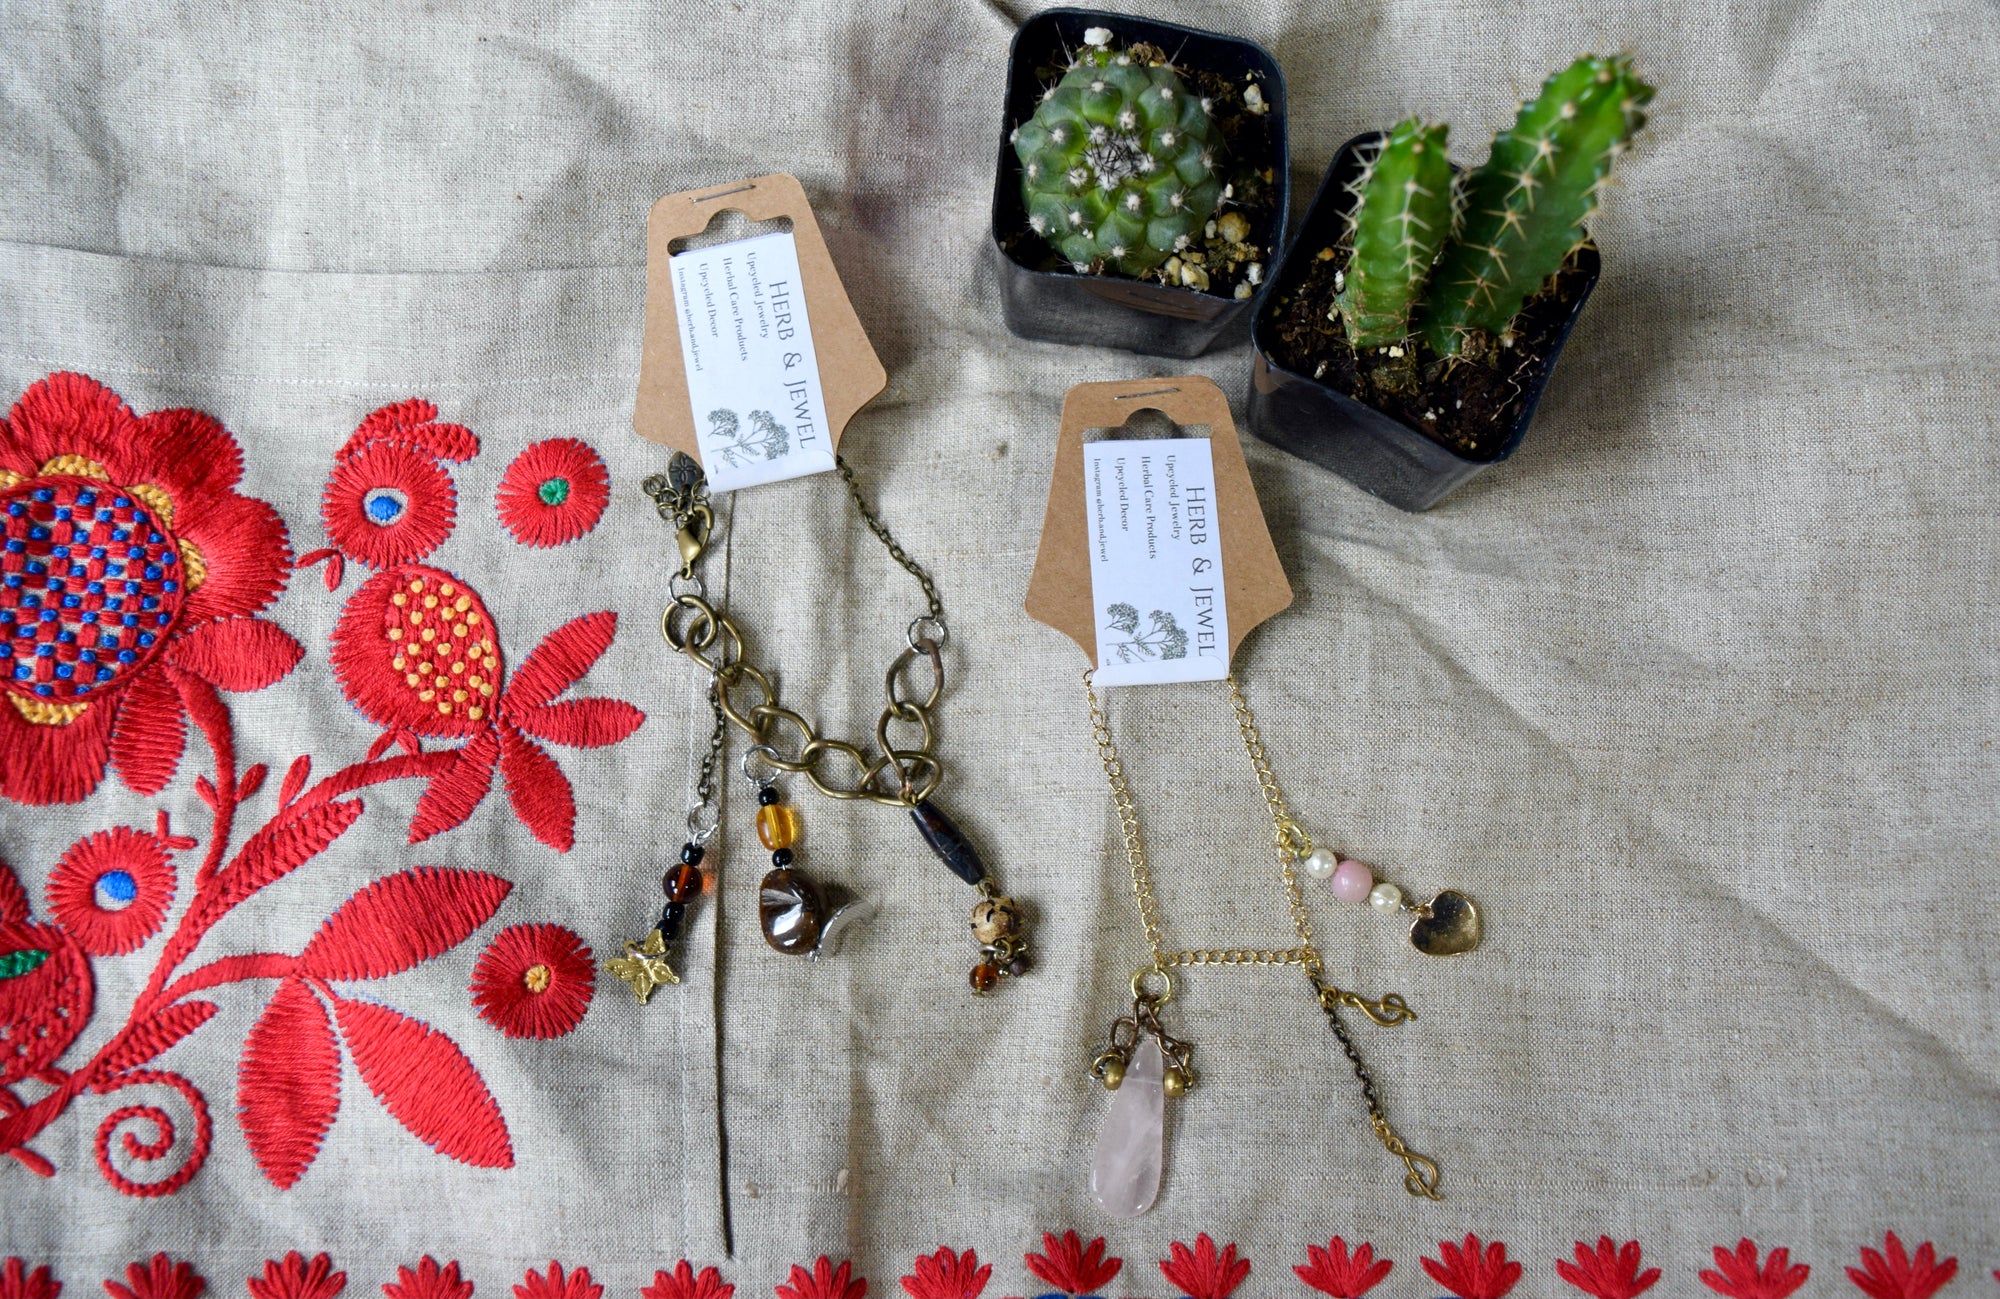 Two bracelets next to two small green cacti. The first bracelet has a dark golden chain with brown hanging beads and charms. The second has a light gold chain with golden hanging charms and pink and white beads or gems.